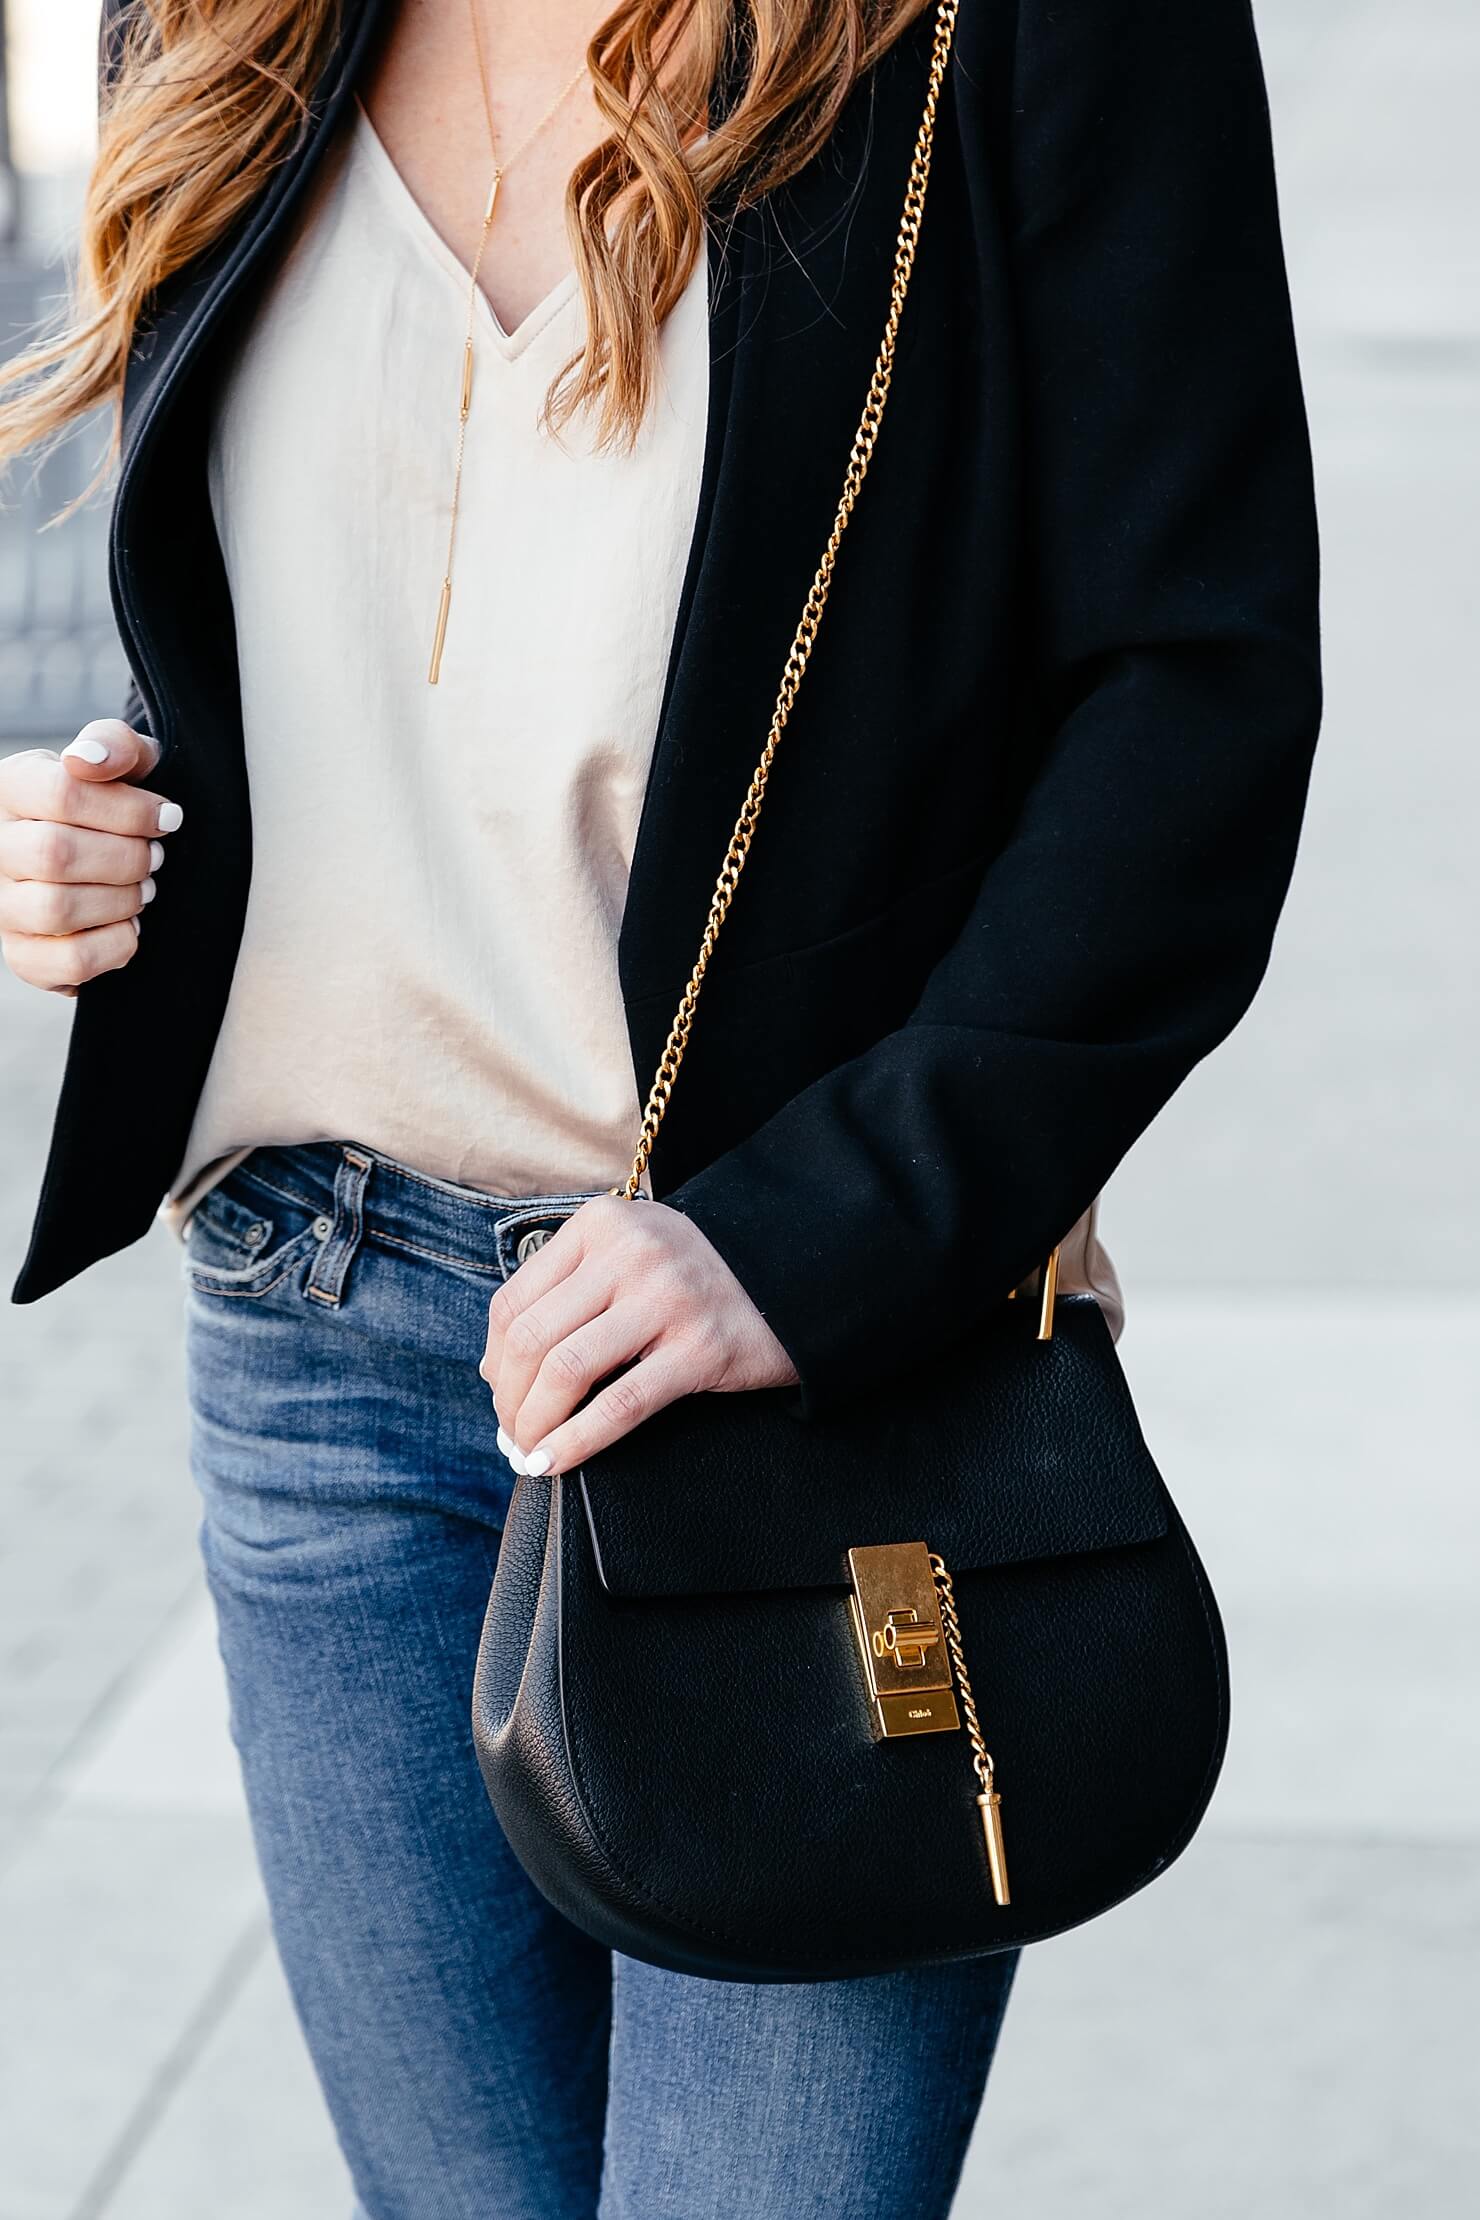 brighton keller styling jeans and black blazer with chloe small drew bag